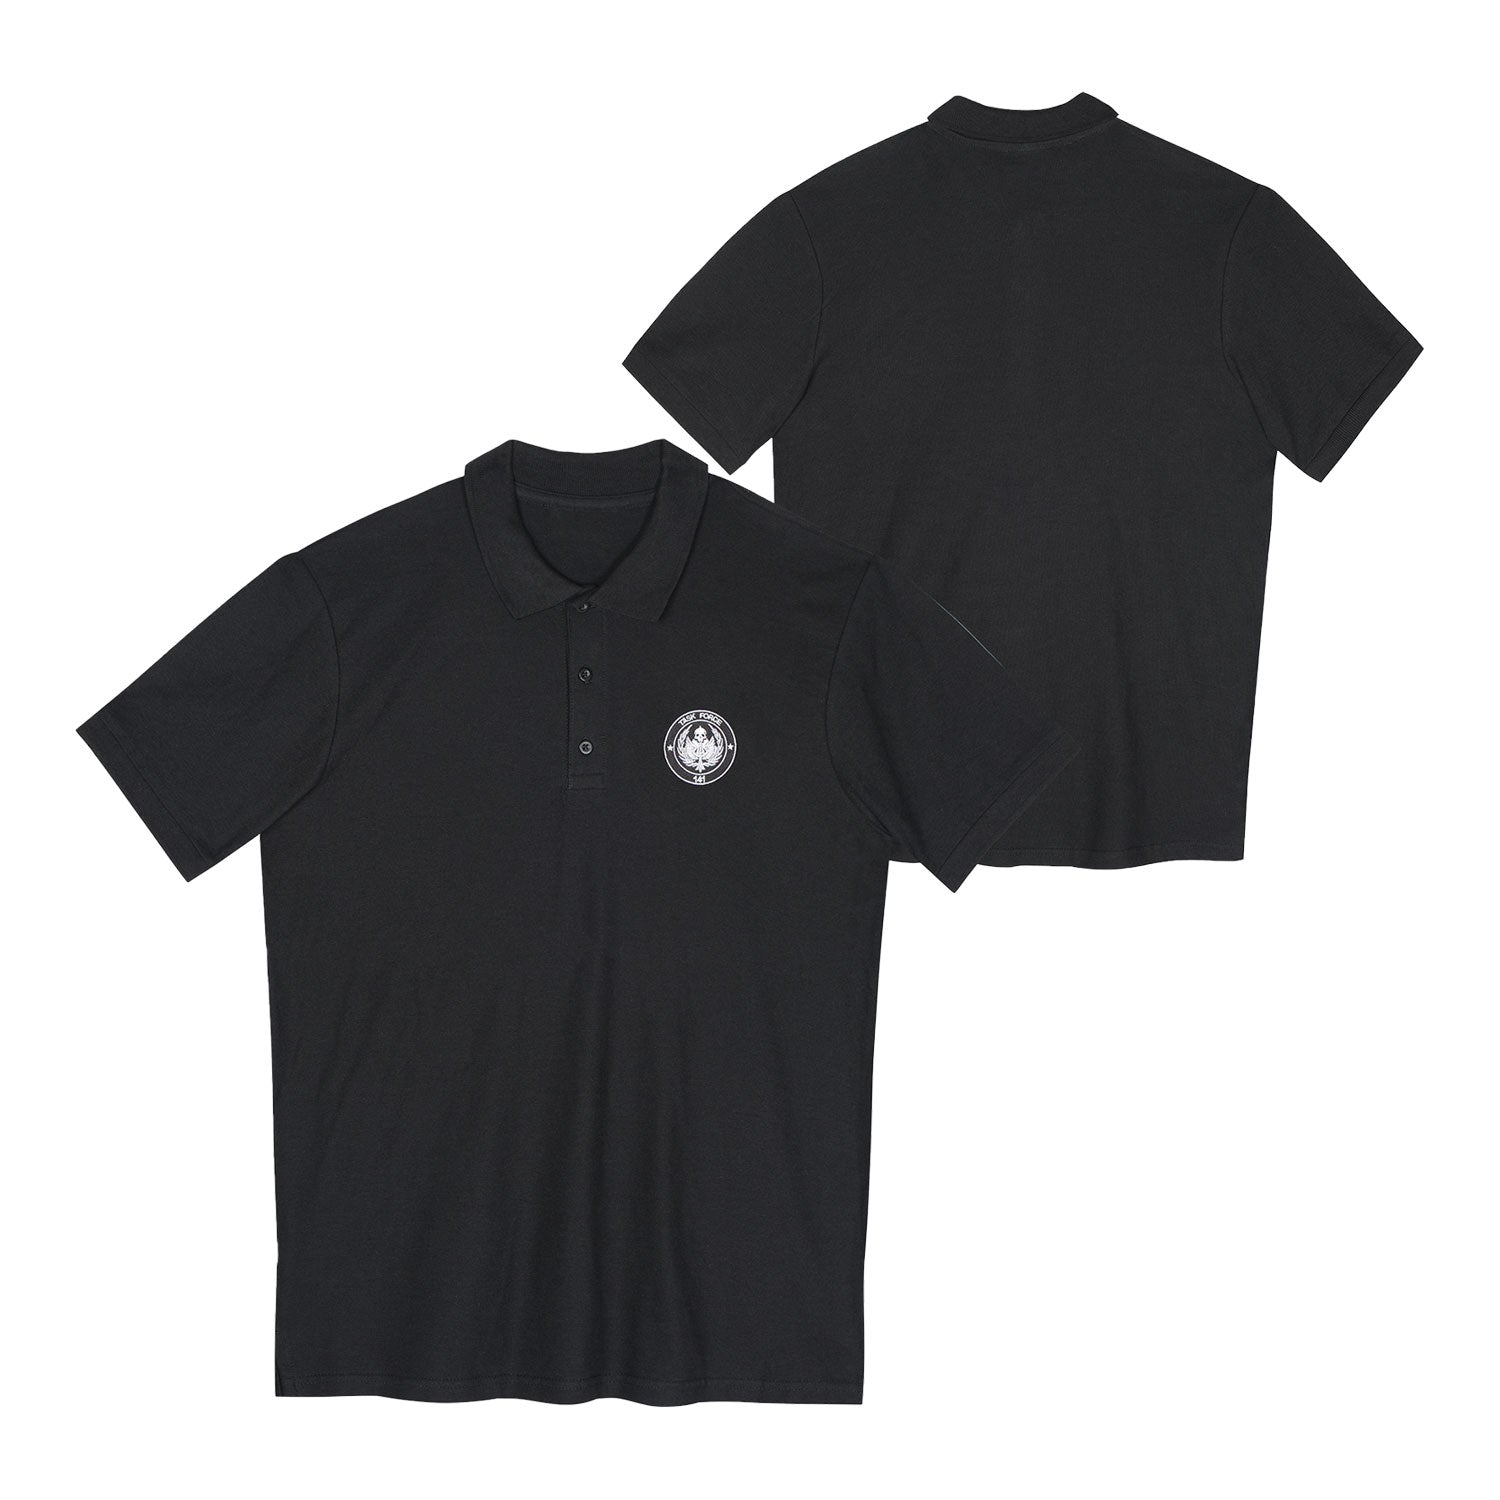 Call of Duty Taskforce 141 Embroidered Black Polo - Front and Back View